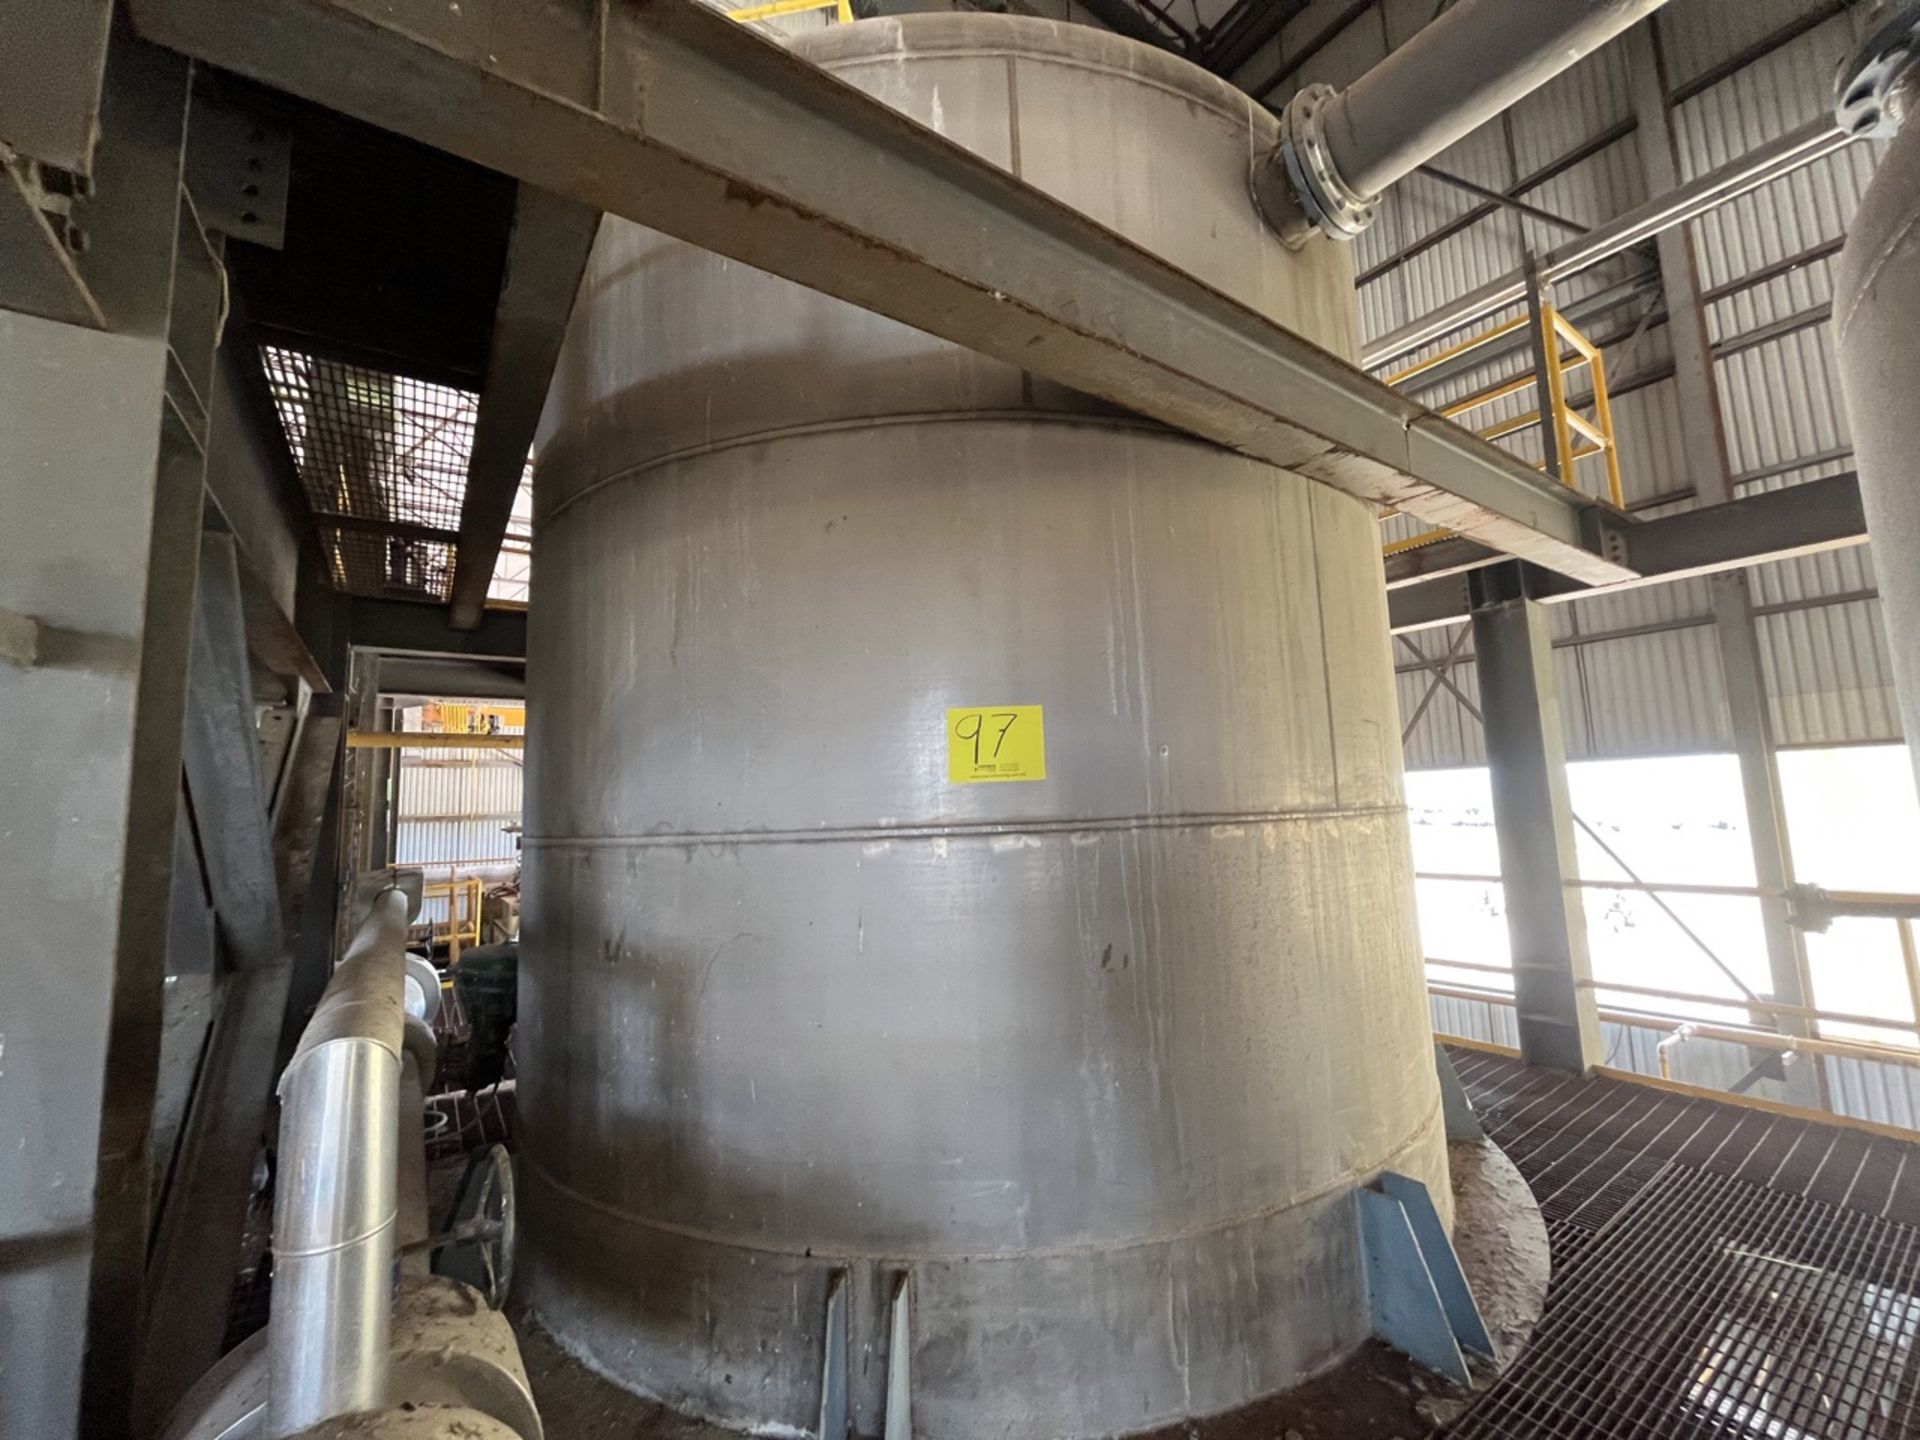 Conical storage tank with stainless steel toriesferica lid measures approximately 4.30 meters in di - Bild 2 aus 37